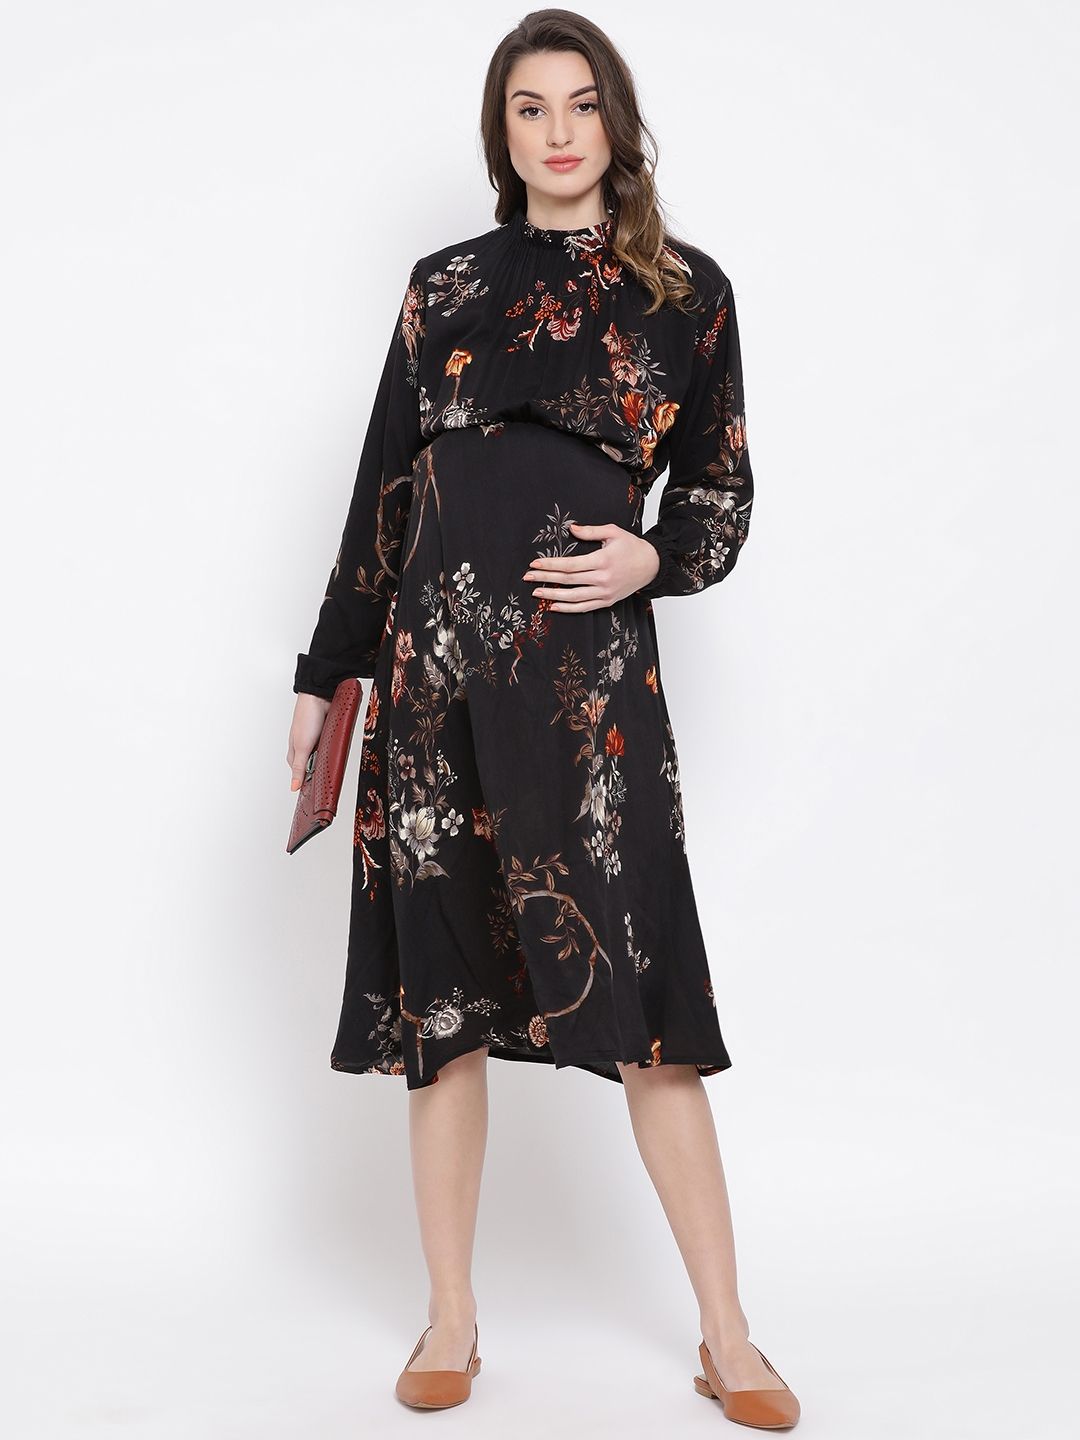 Oxolloxo Women Black Floral Printed A-Line Maternity Dress Price in India